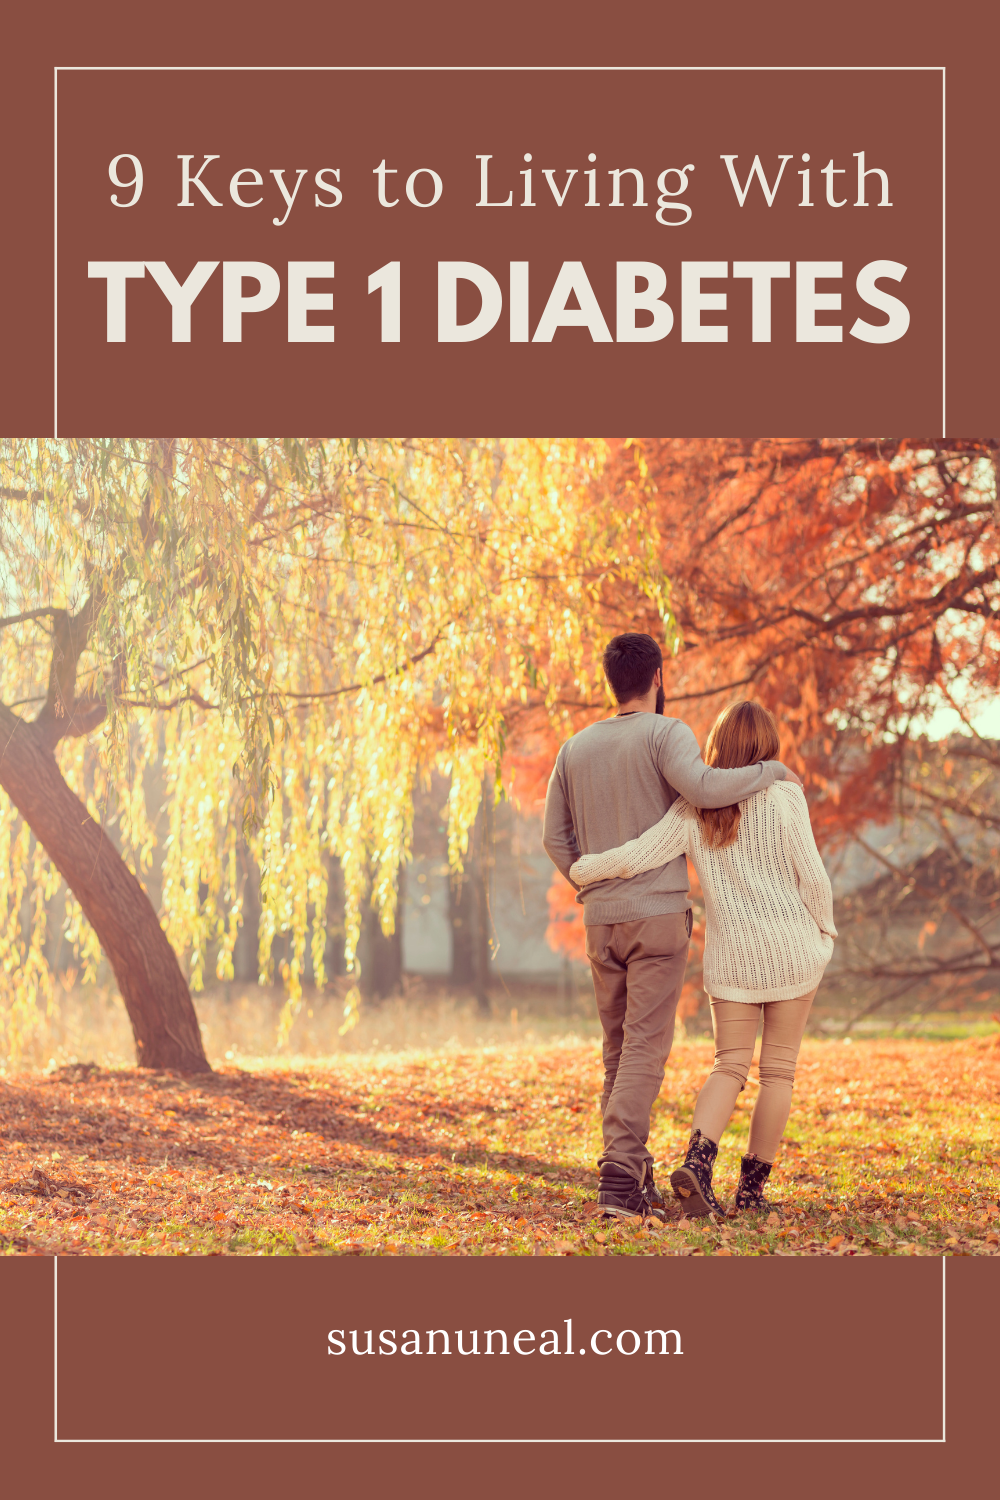 Living with Diabetes - How to Thrive, Not Just Survive